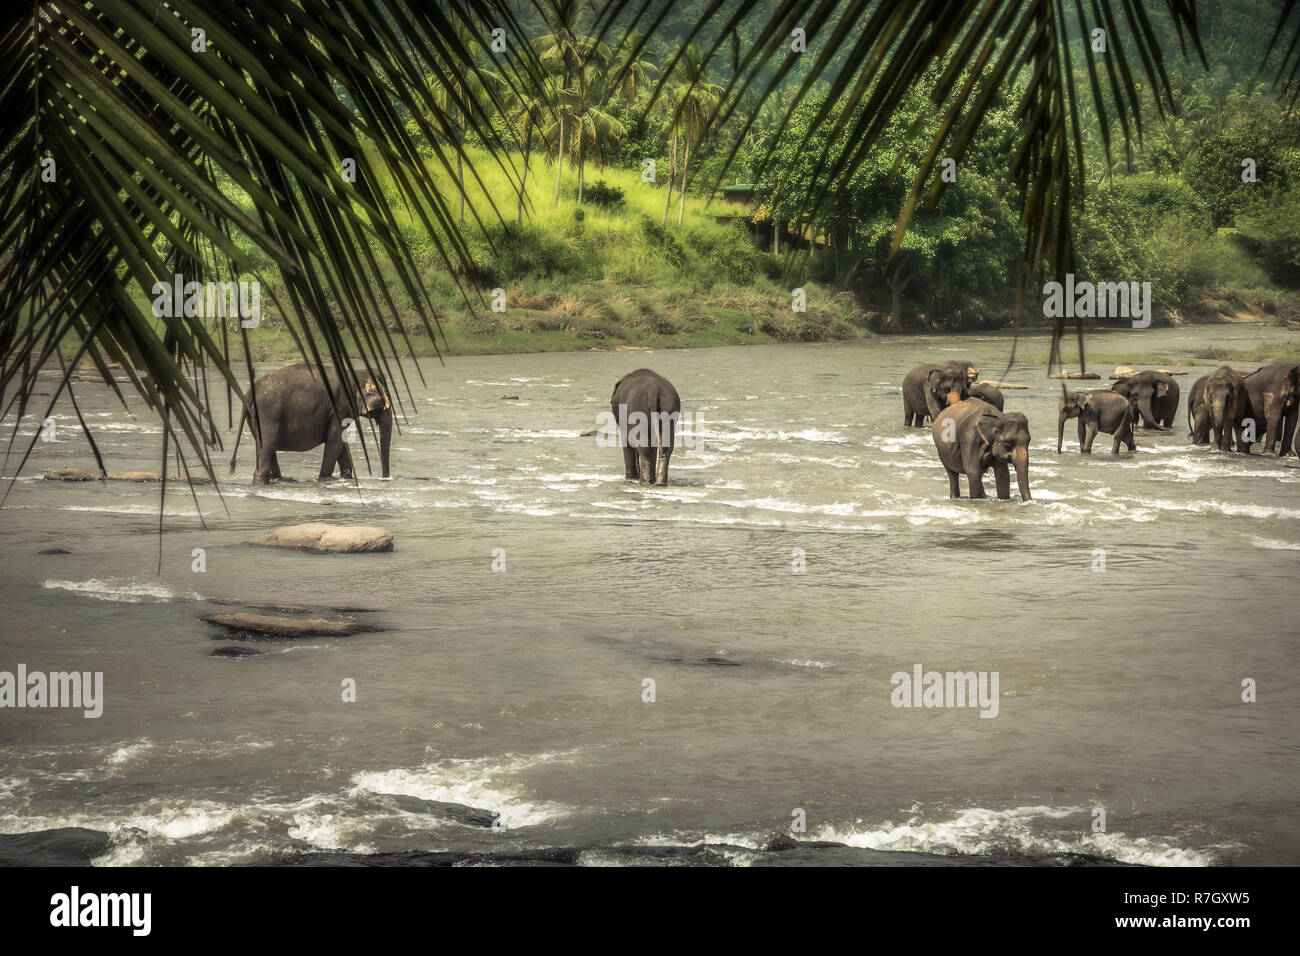 Group of elephants swimming on river amoung lush green tropical foliage in wildlife reserve Stock Photo